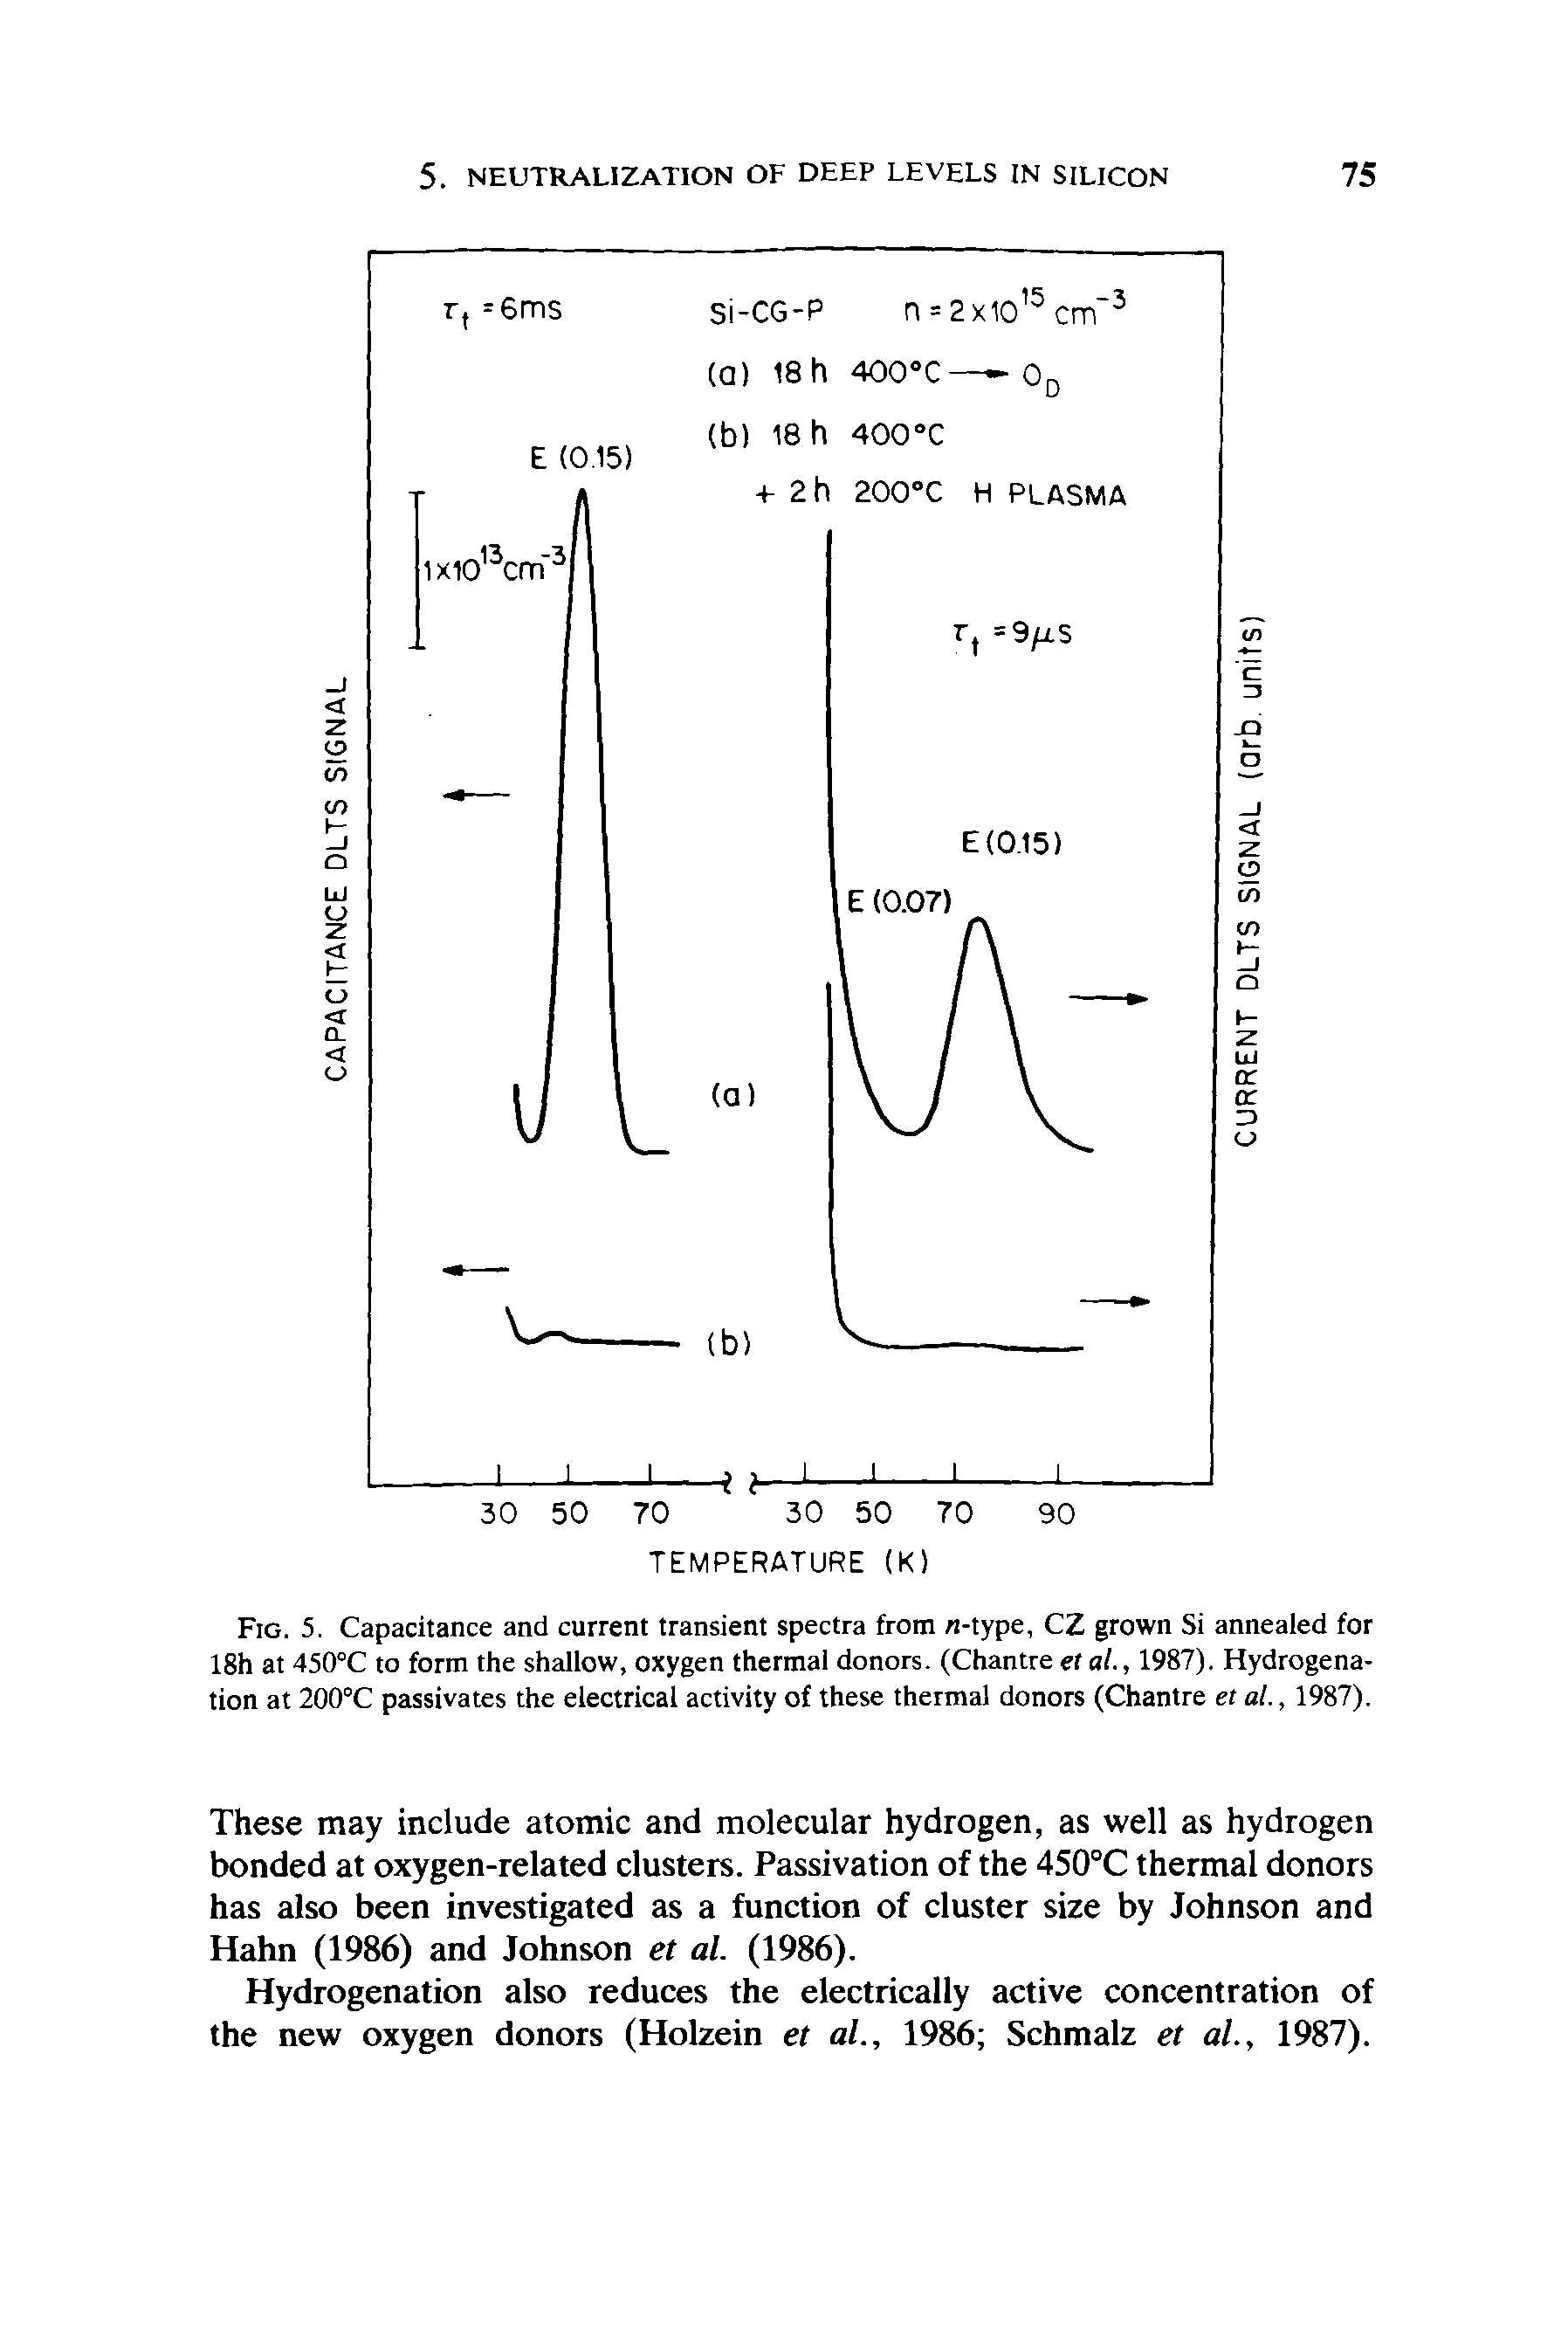 Fig. 5. Capacitance and current transient spectra from -type, CZ grown Si annealed for 18h at 450°C to form the shallow, oxygen thermal donors. (Chantre et al., 1987). Hydrogenation at 200°C passivates the electrical activity of these thermal donors (Chantre et at, 1987).